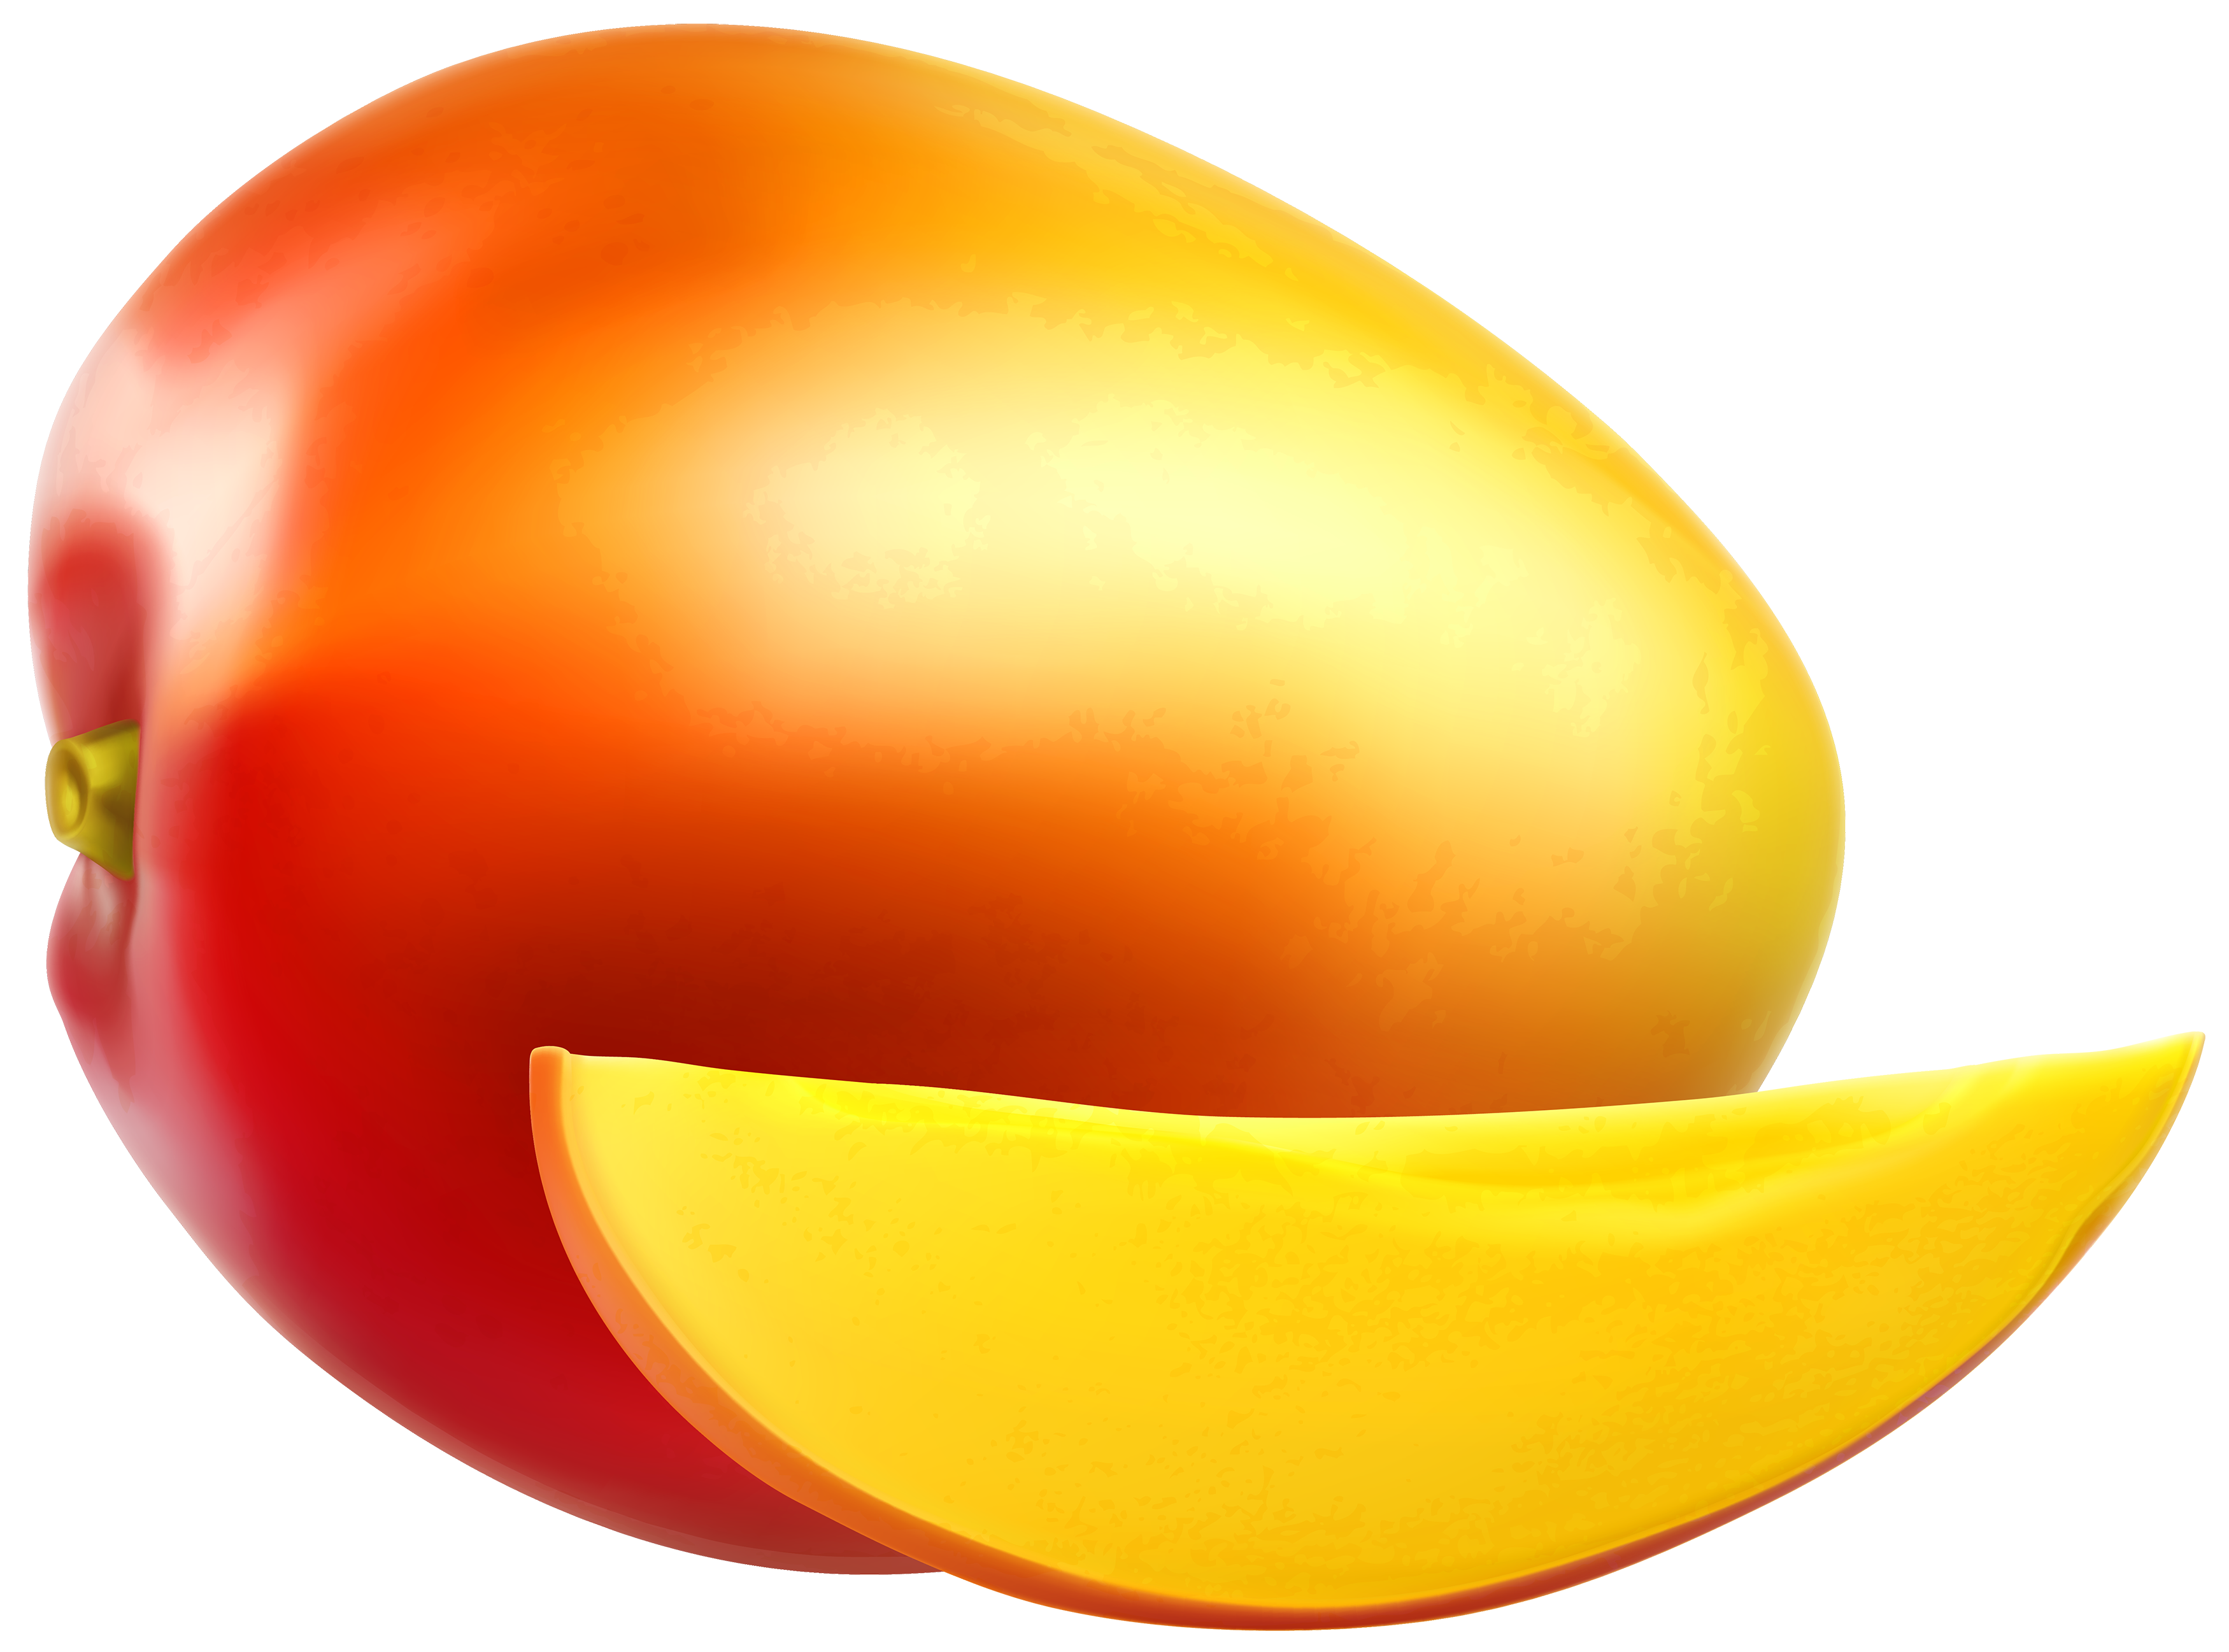 Mango clipart prutas. Collection of free boxes